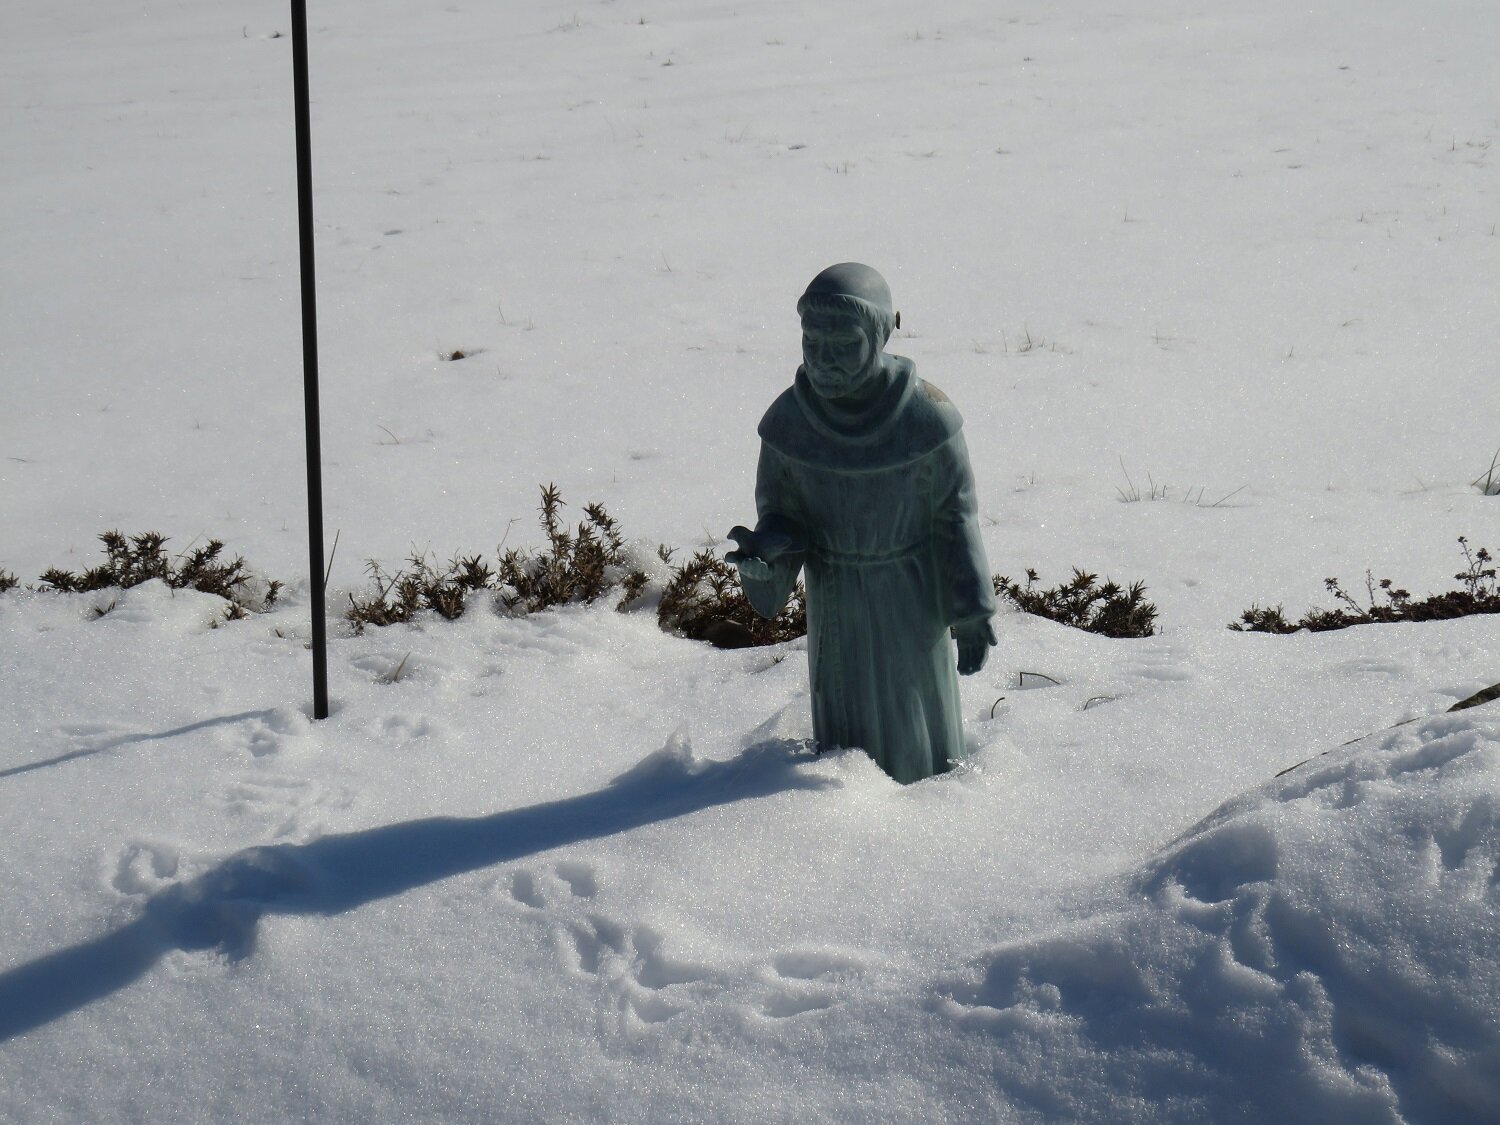  Faithful St. Francis, even keeping watch in the snow … 